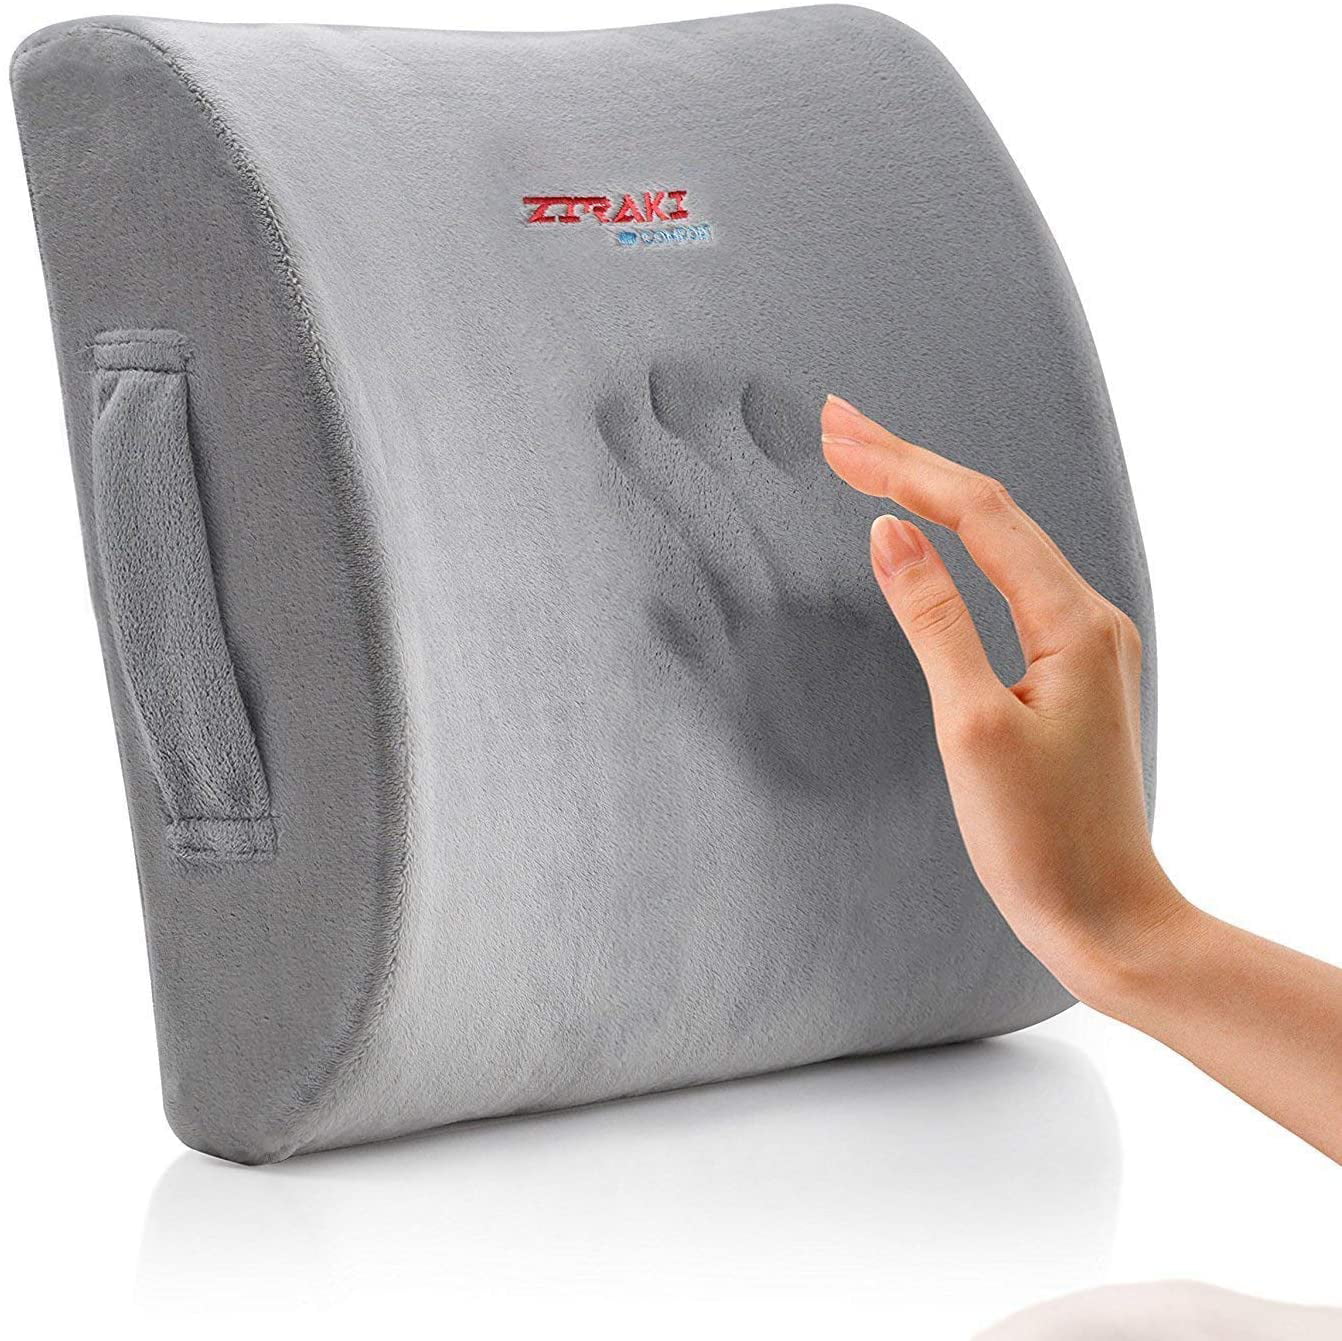 This $30 Back Pain Relief Cushion Has 13,400+ 5-Star  Reviews